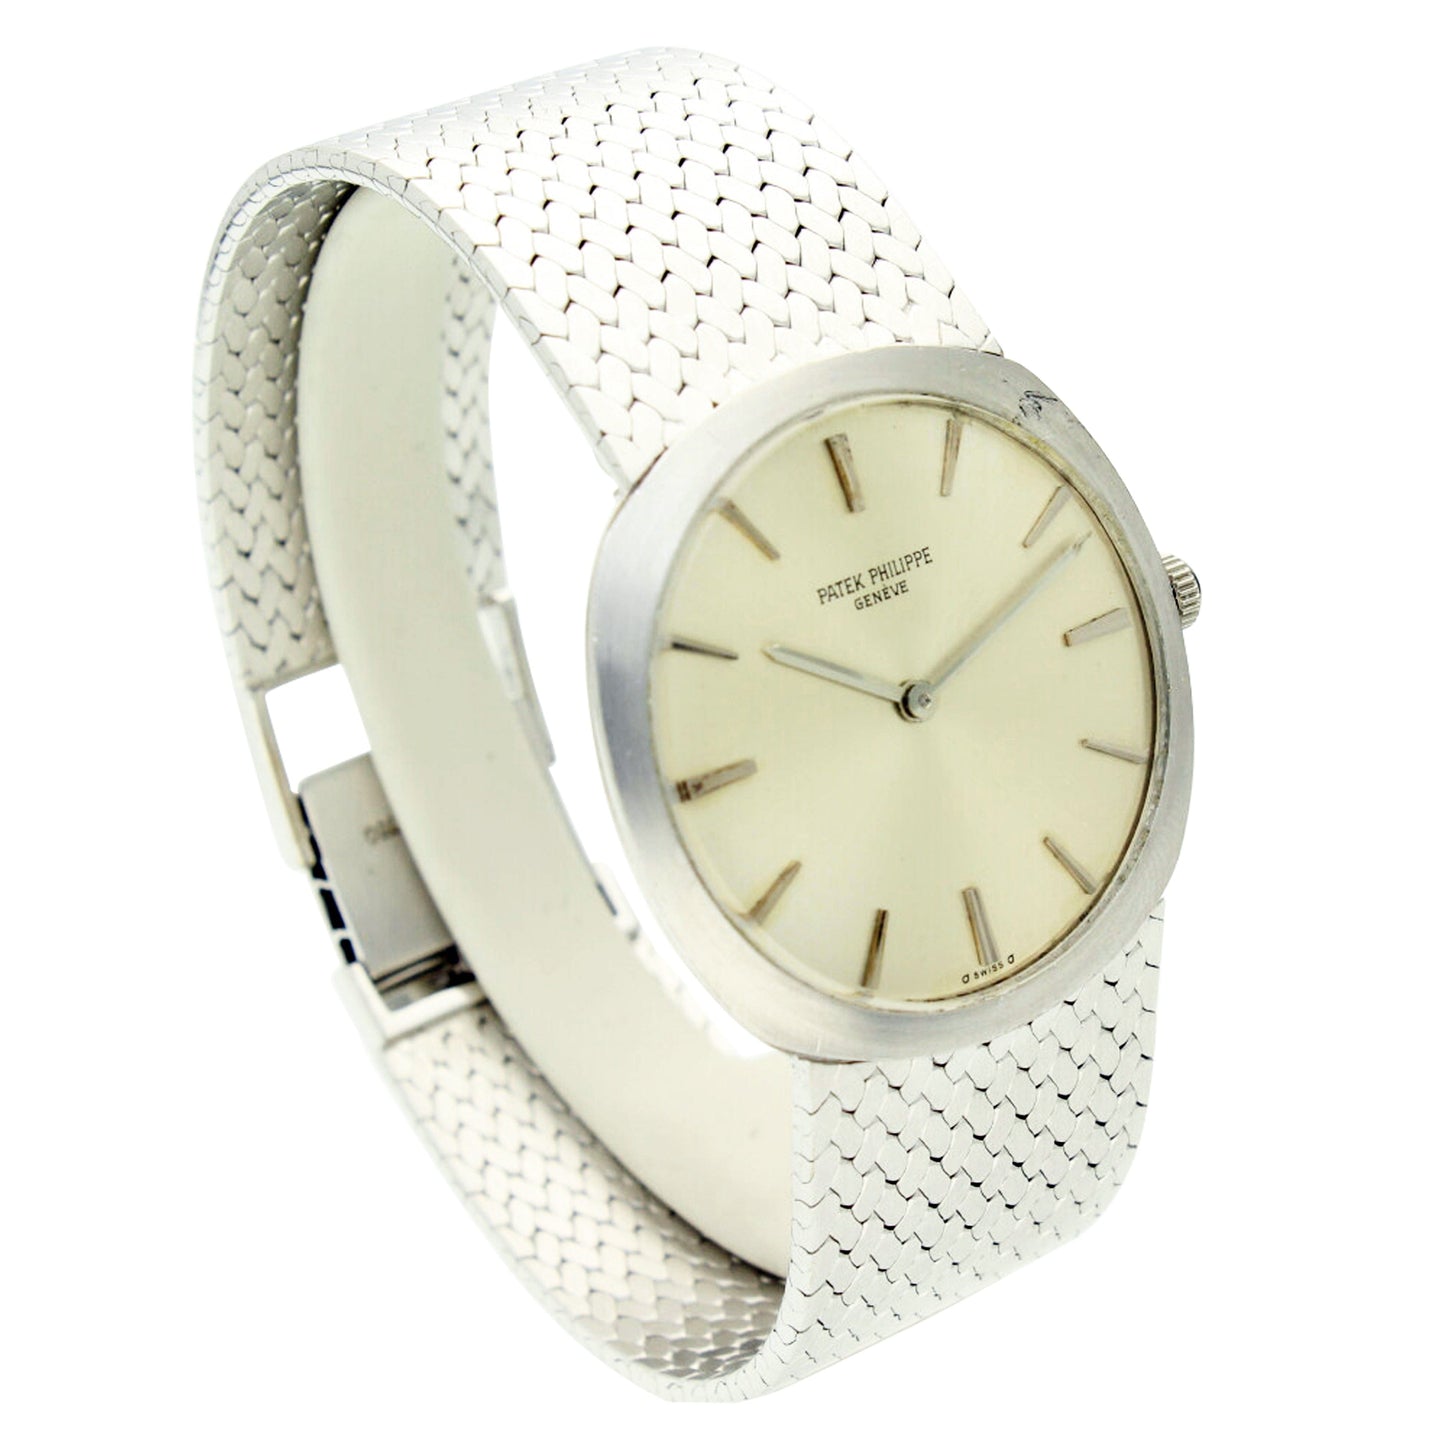 18ct white gold Patek Philippe, reference 3544 "Montro Ellipse" bracelet watch. Made 1970